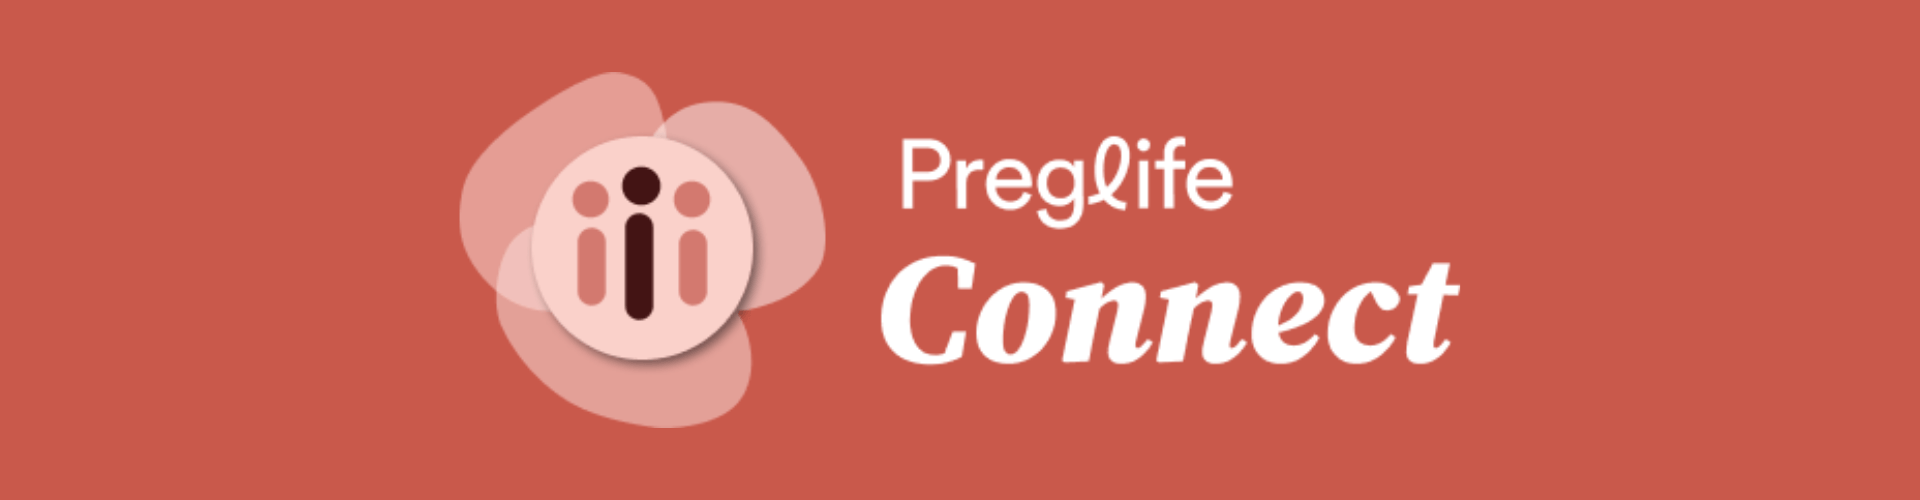 Preglife connect- The social network for pregnancy and parenthood